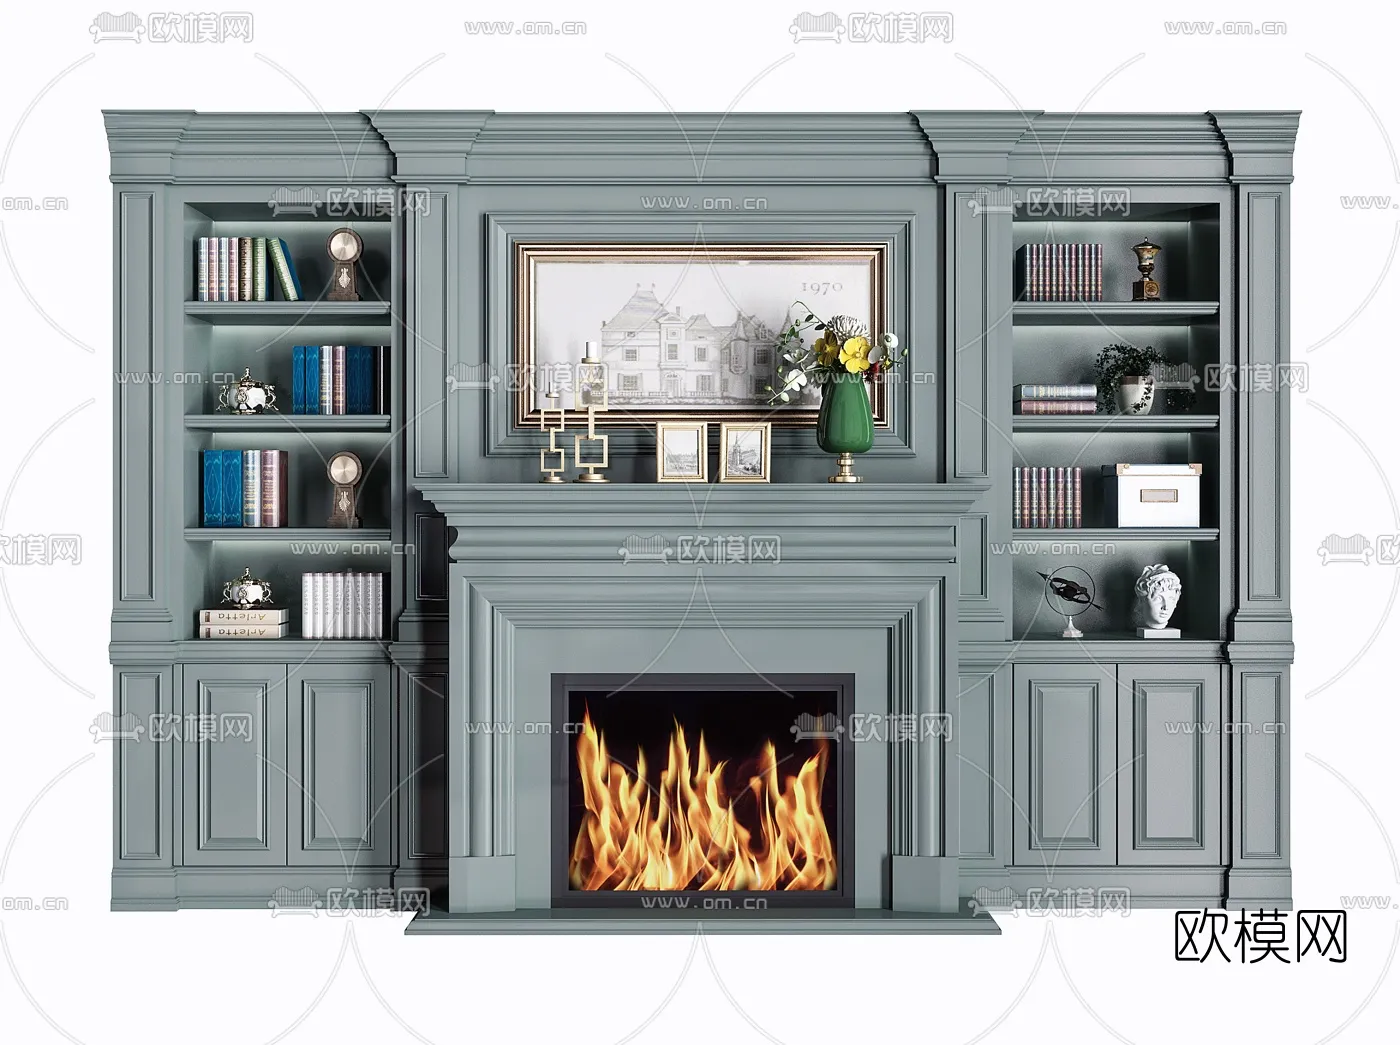 CLASSIC – FIREPLACE 3DMODELS – 015